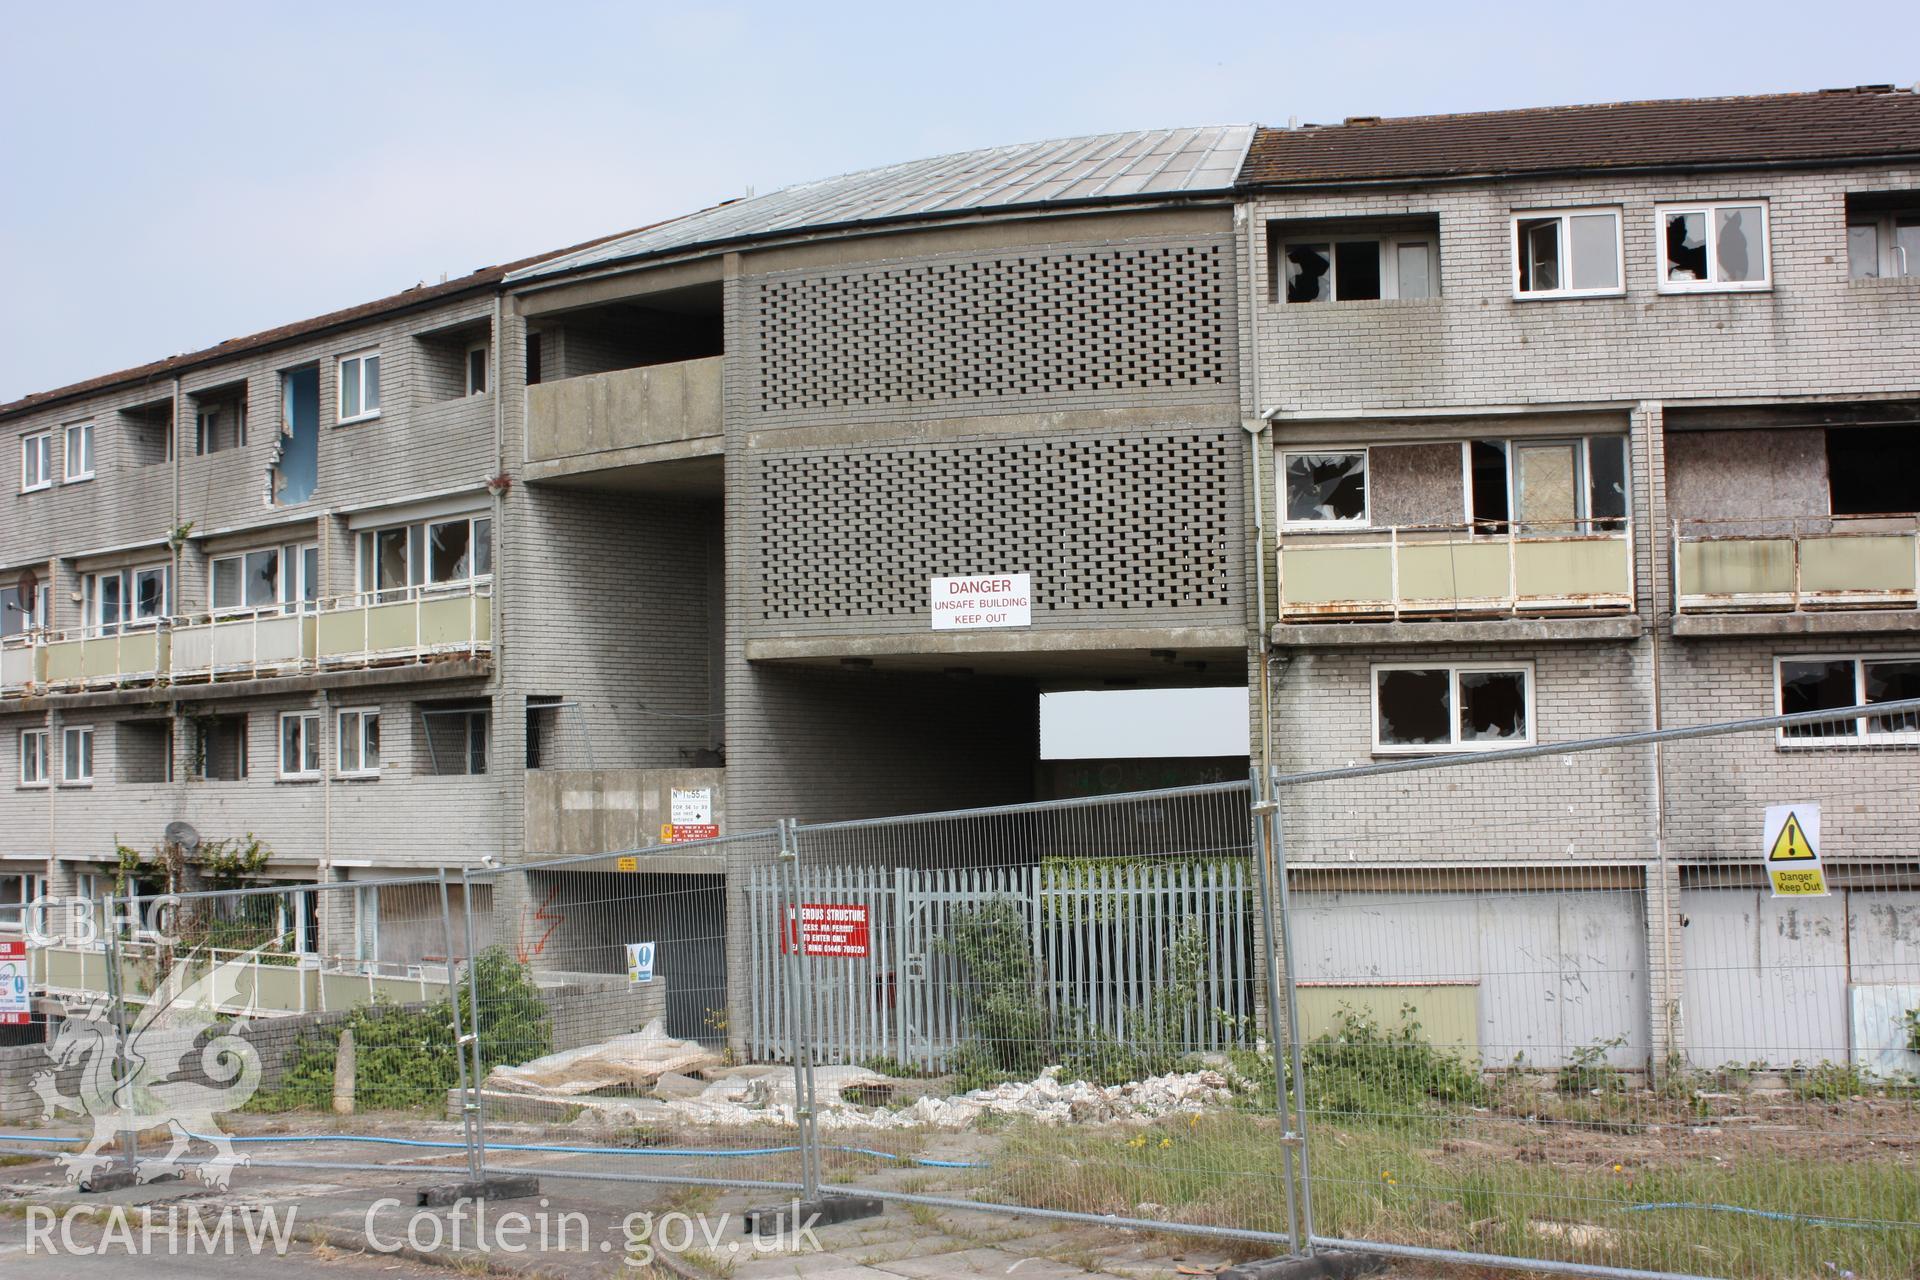 Photographic survey showing the exterior of the Billy Banks Estate by Geoff Ward 2010.